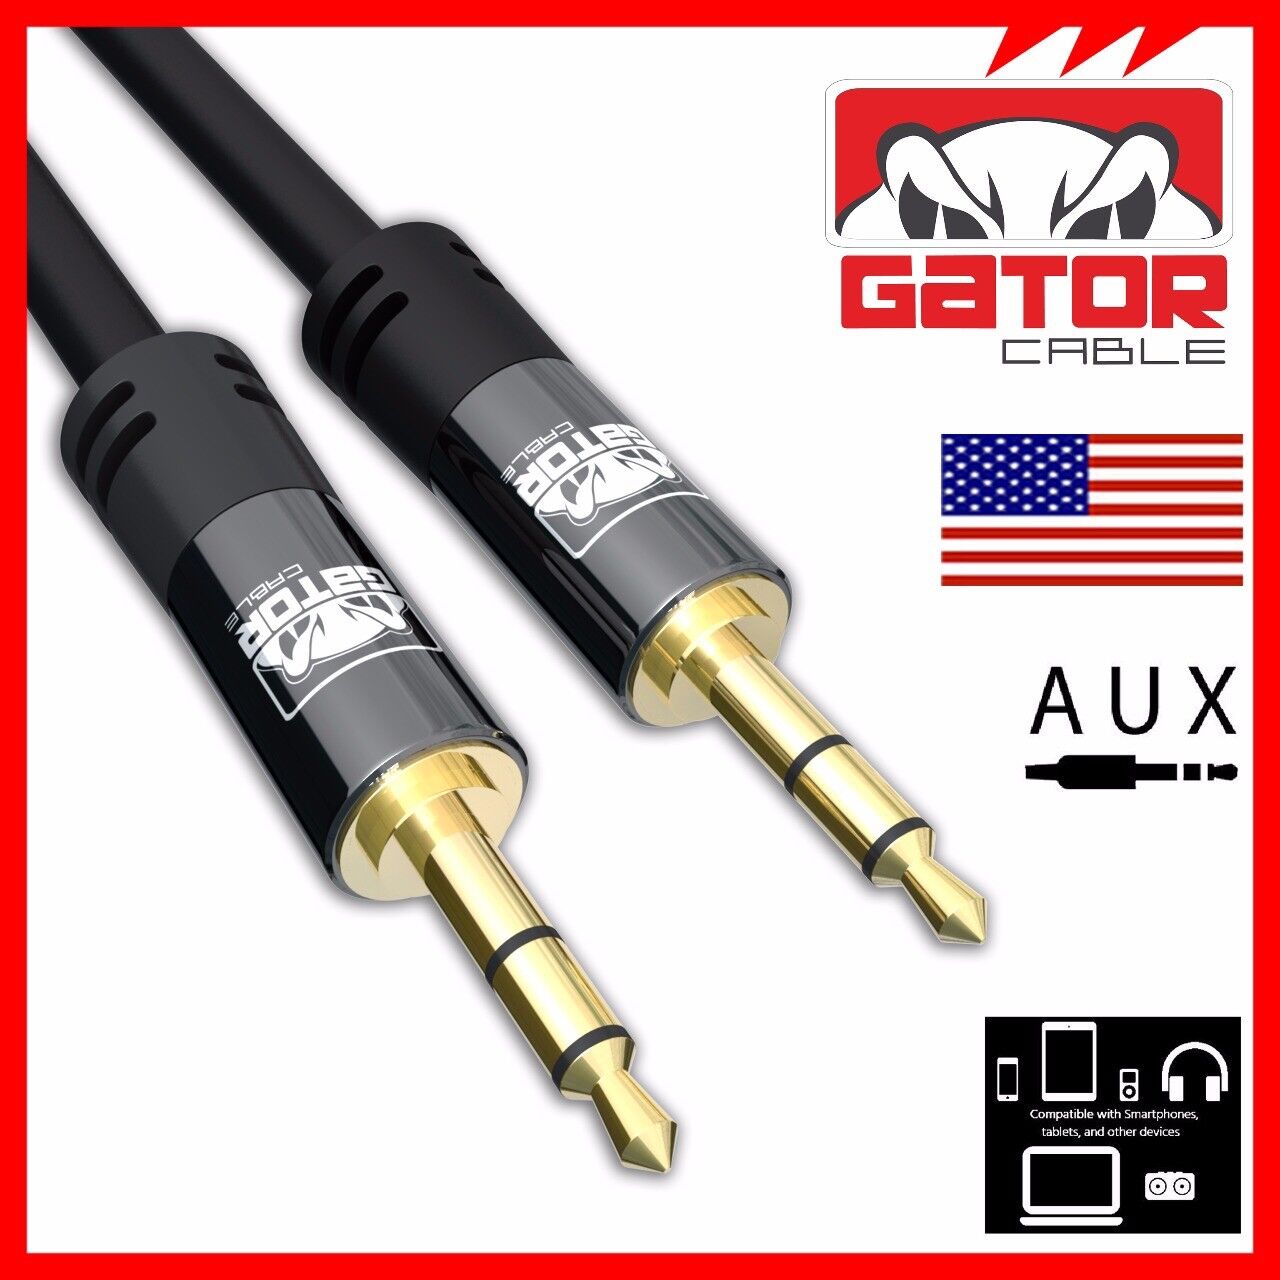 AUX 3.5mm Audio Cable Cord Male to Male For Phone iPhone Samsung LG Earphones Gator Cable AUX-3.5mm-Male-to-Male - фотография #5